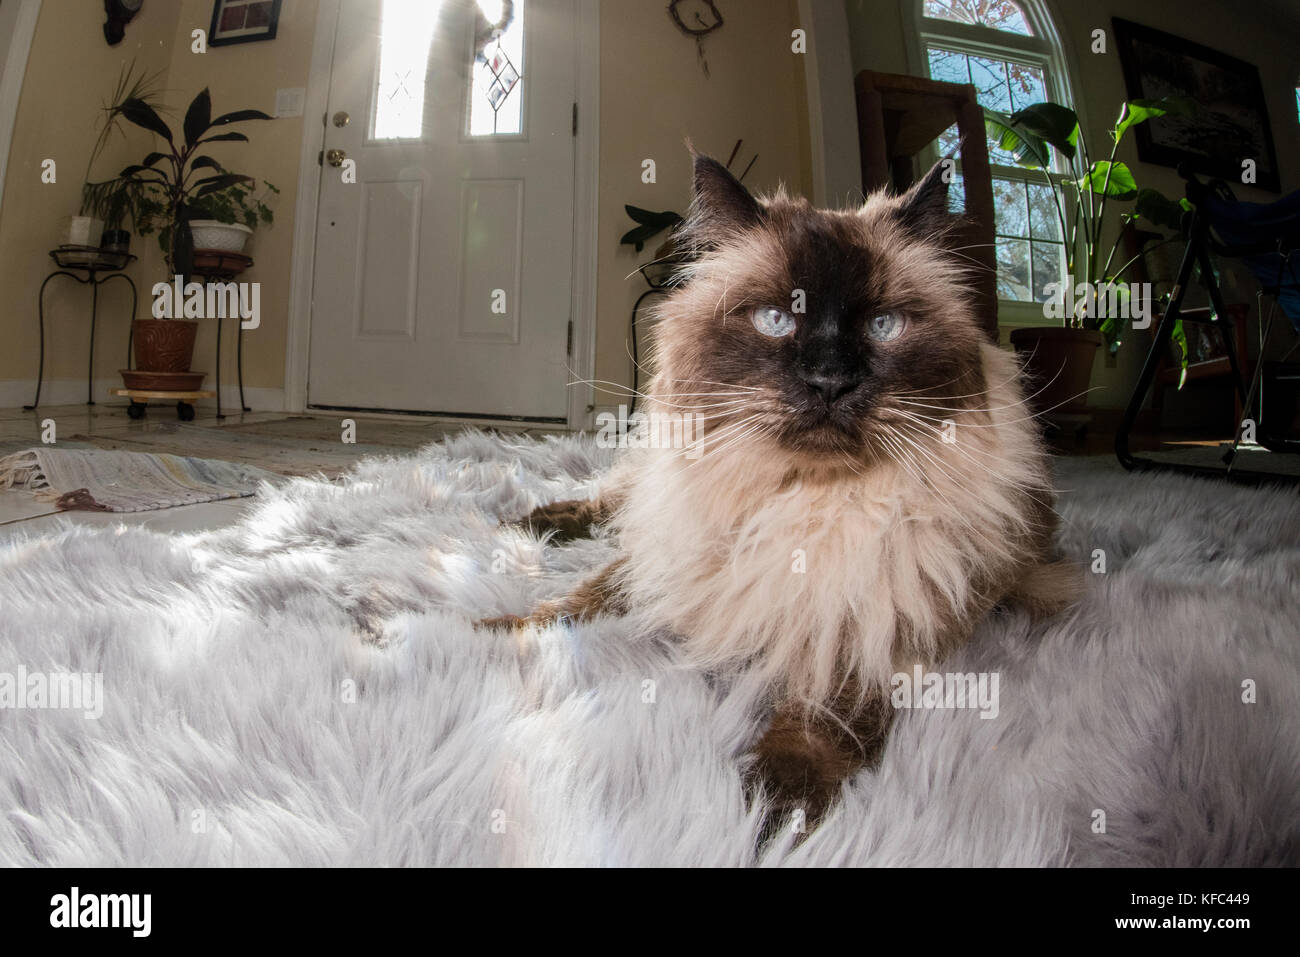 A Beautiful Himalayan Siamese Cat Laying On A Sunny Spot On A Rug In The Living Room Stock Photo Alamy